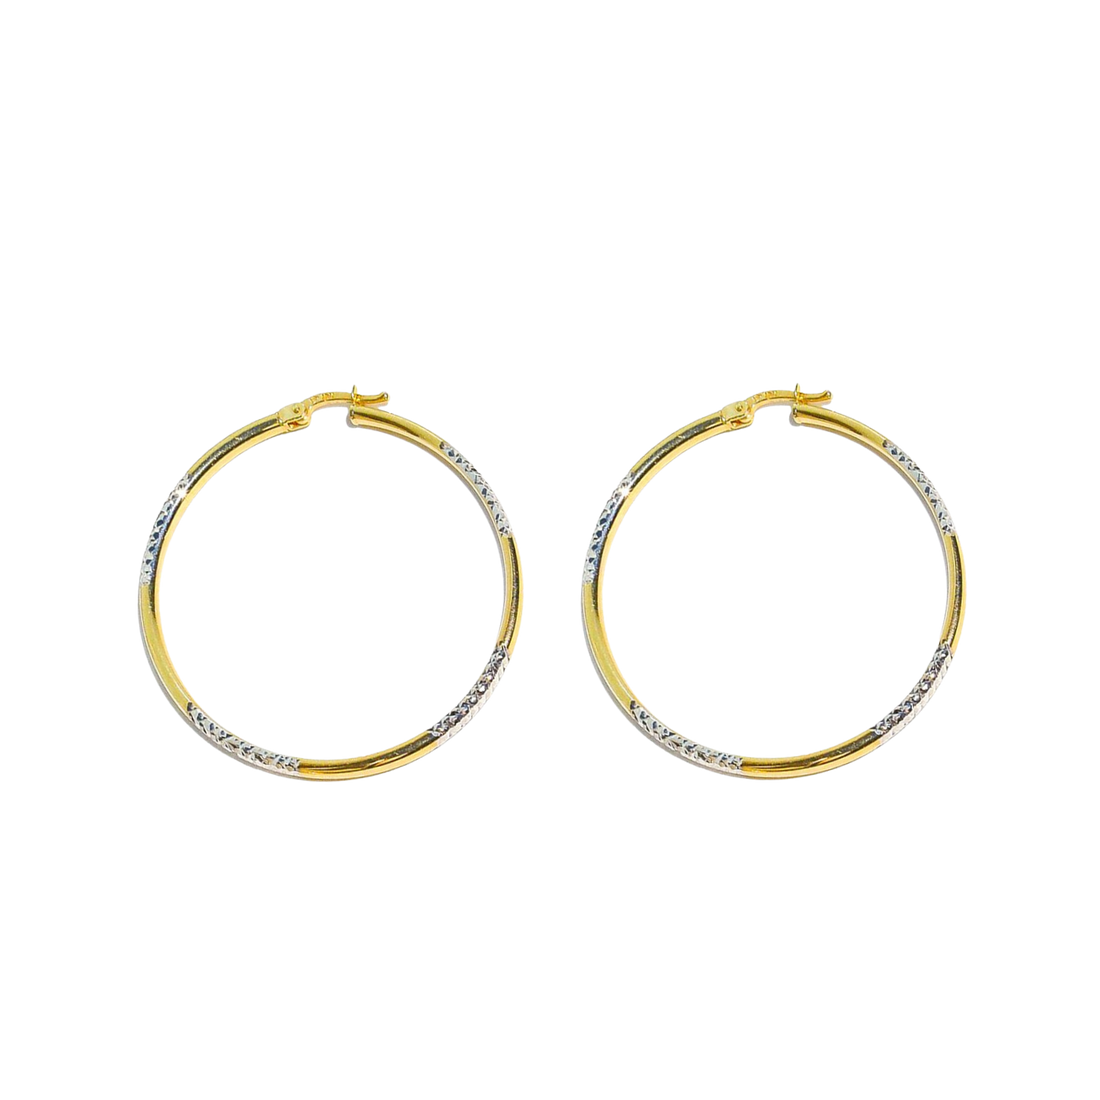 fancy two tone gold hoops canada, two tone diamond hoop earrings, two tone hoop earrings, two tone gold hoop earrings, two tone gold earrings